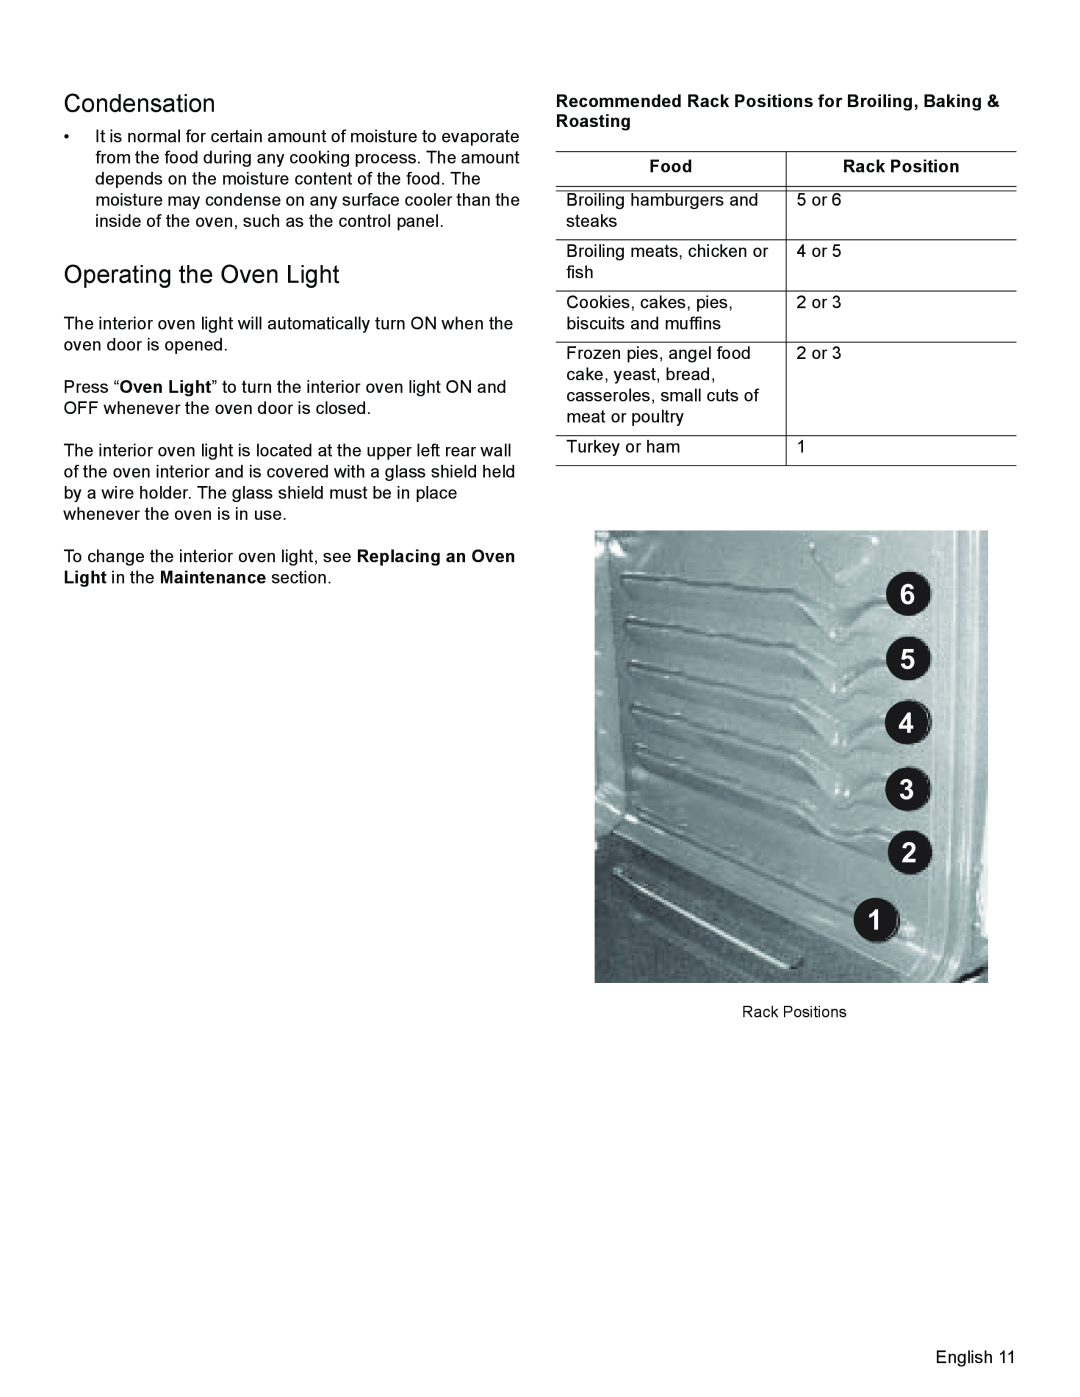 Bosch Appliances HGS3053UC manual 6 5 4 3 2 1, Condensation, Operating the Oven Light, Food, Rack Position 